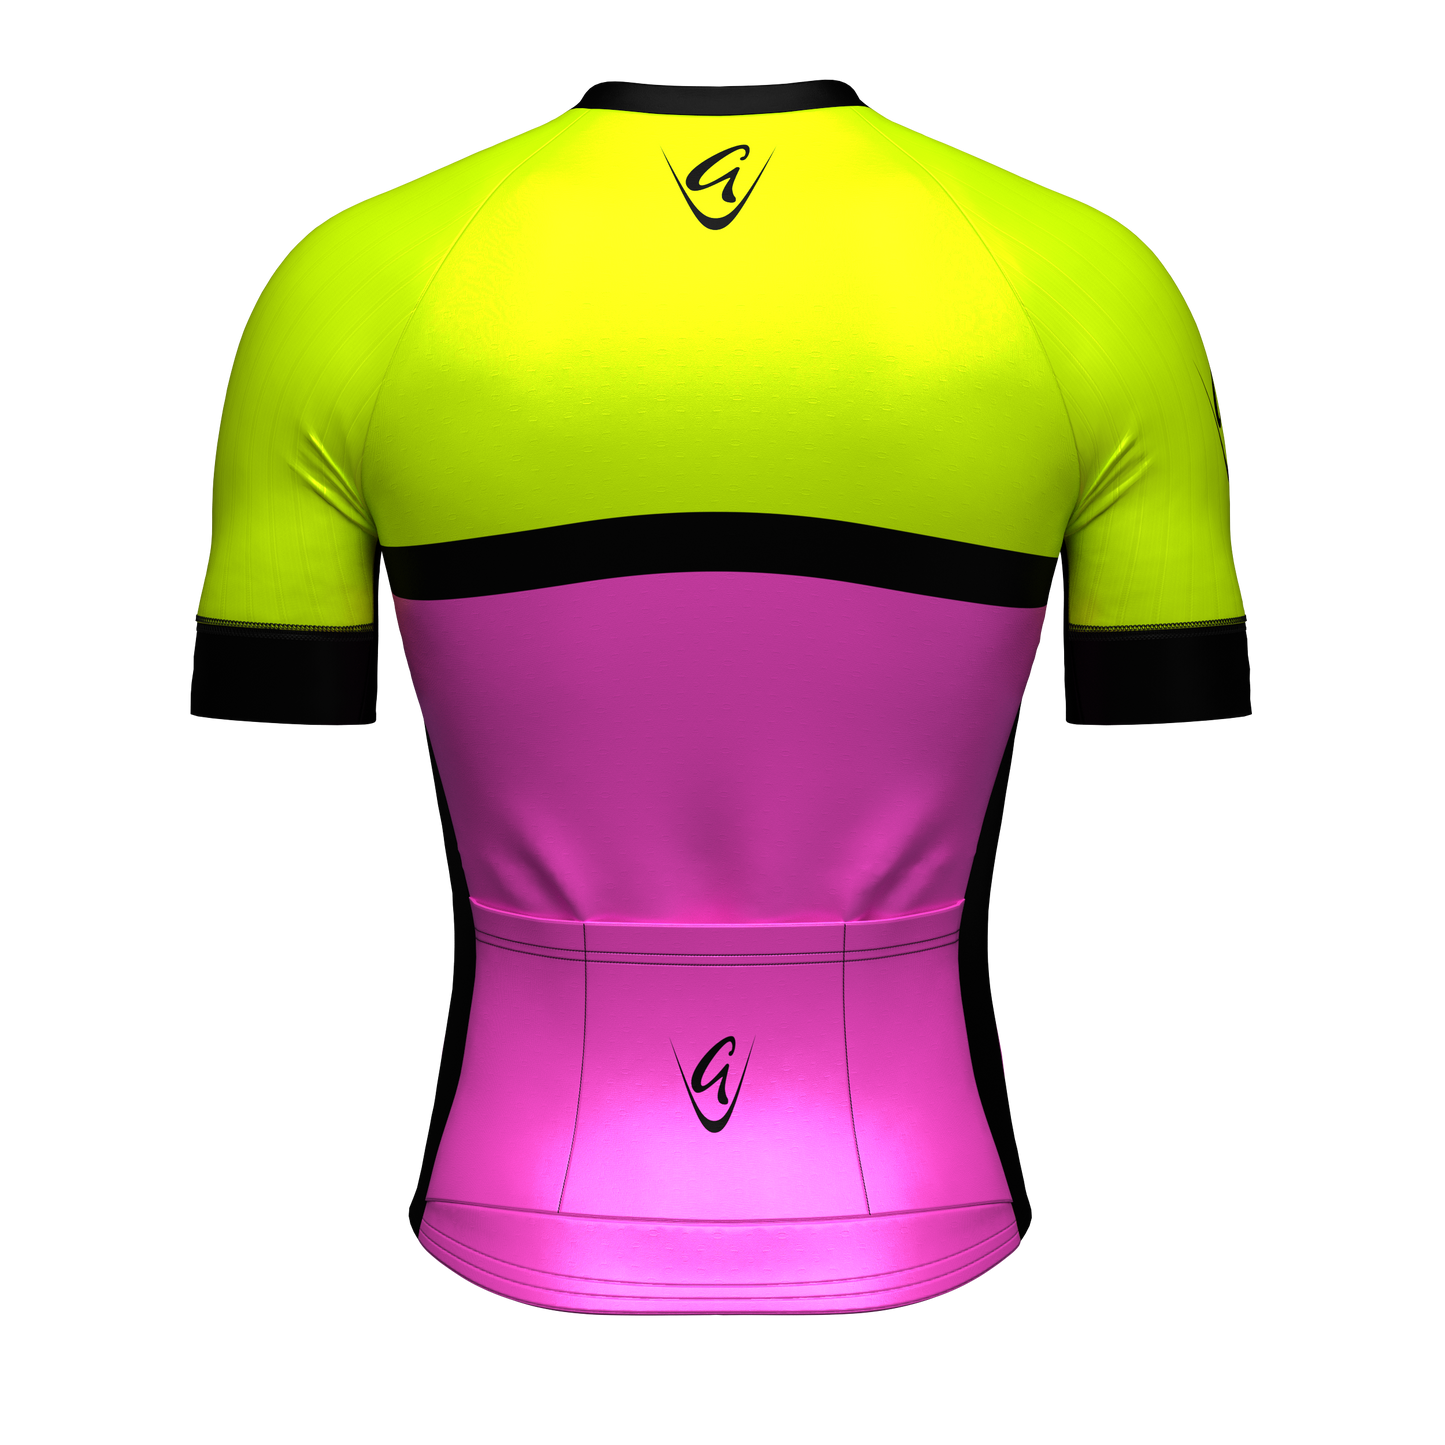 Now you see me Short Sleeve Elite Cycling Jersey